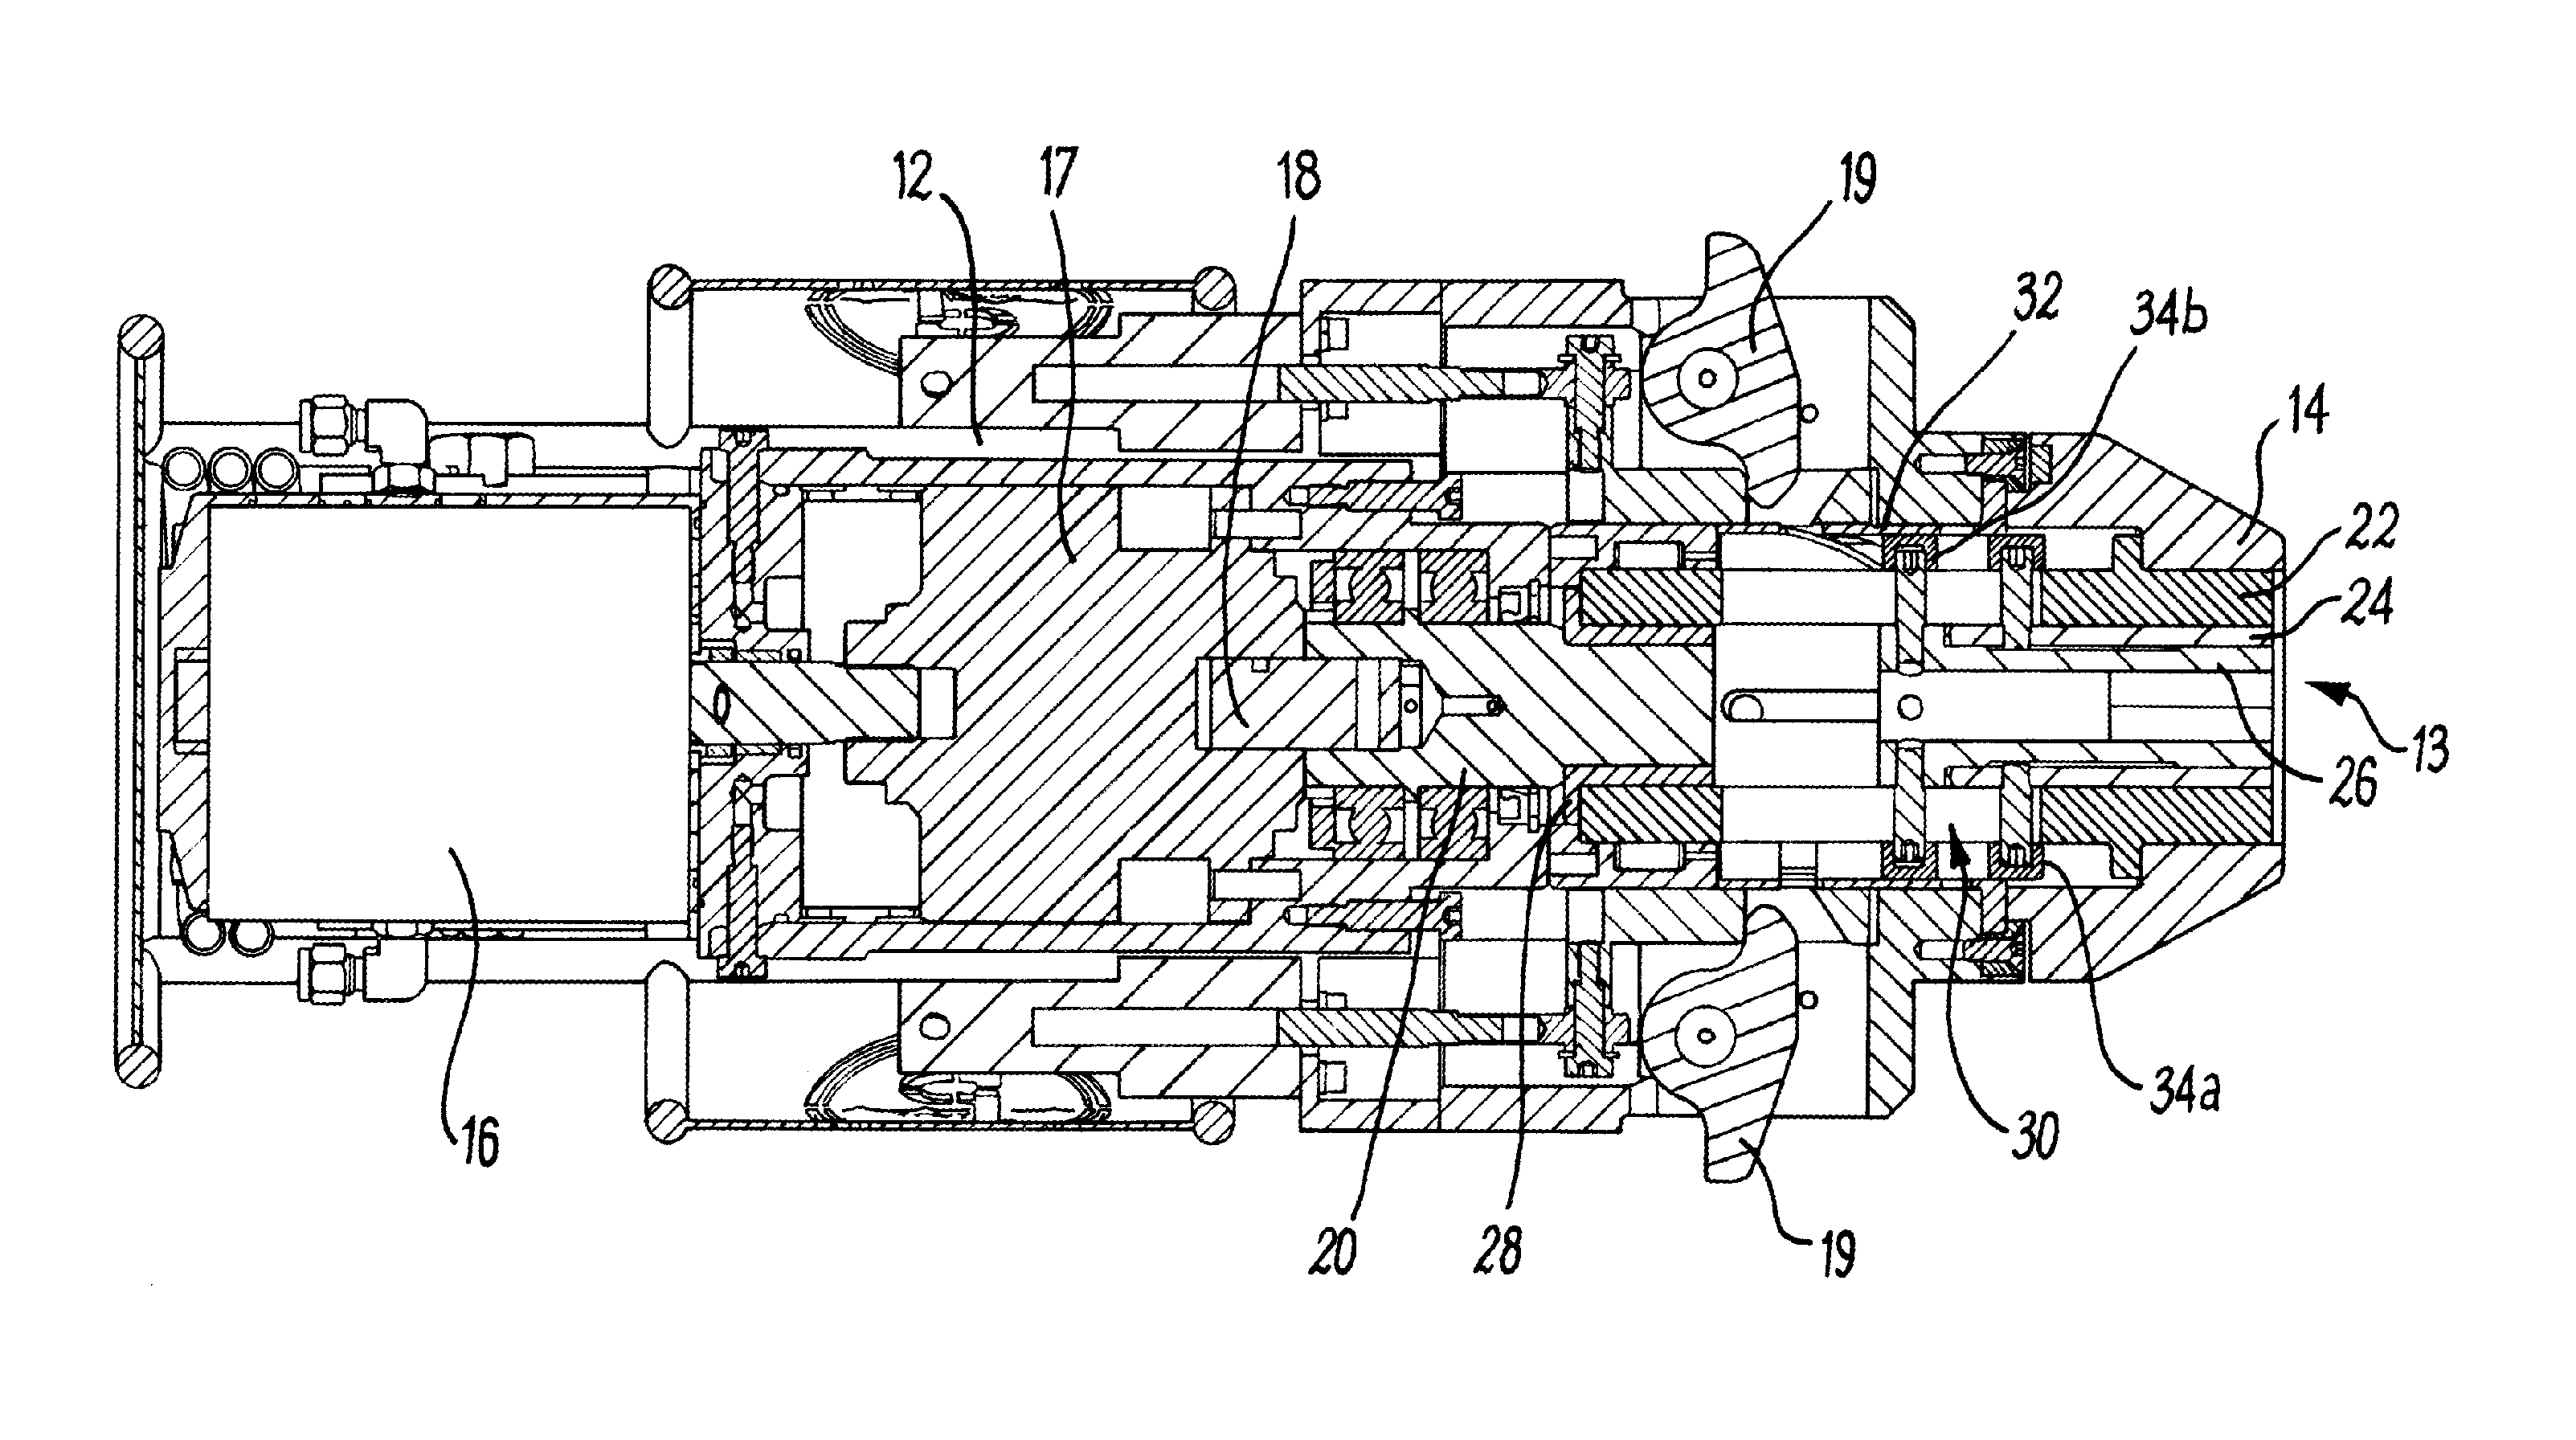 Torque tool, socket selection mechanism, and methods of use